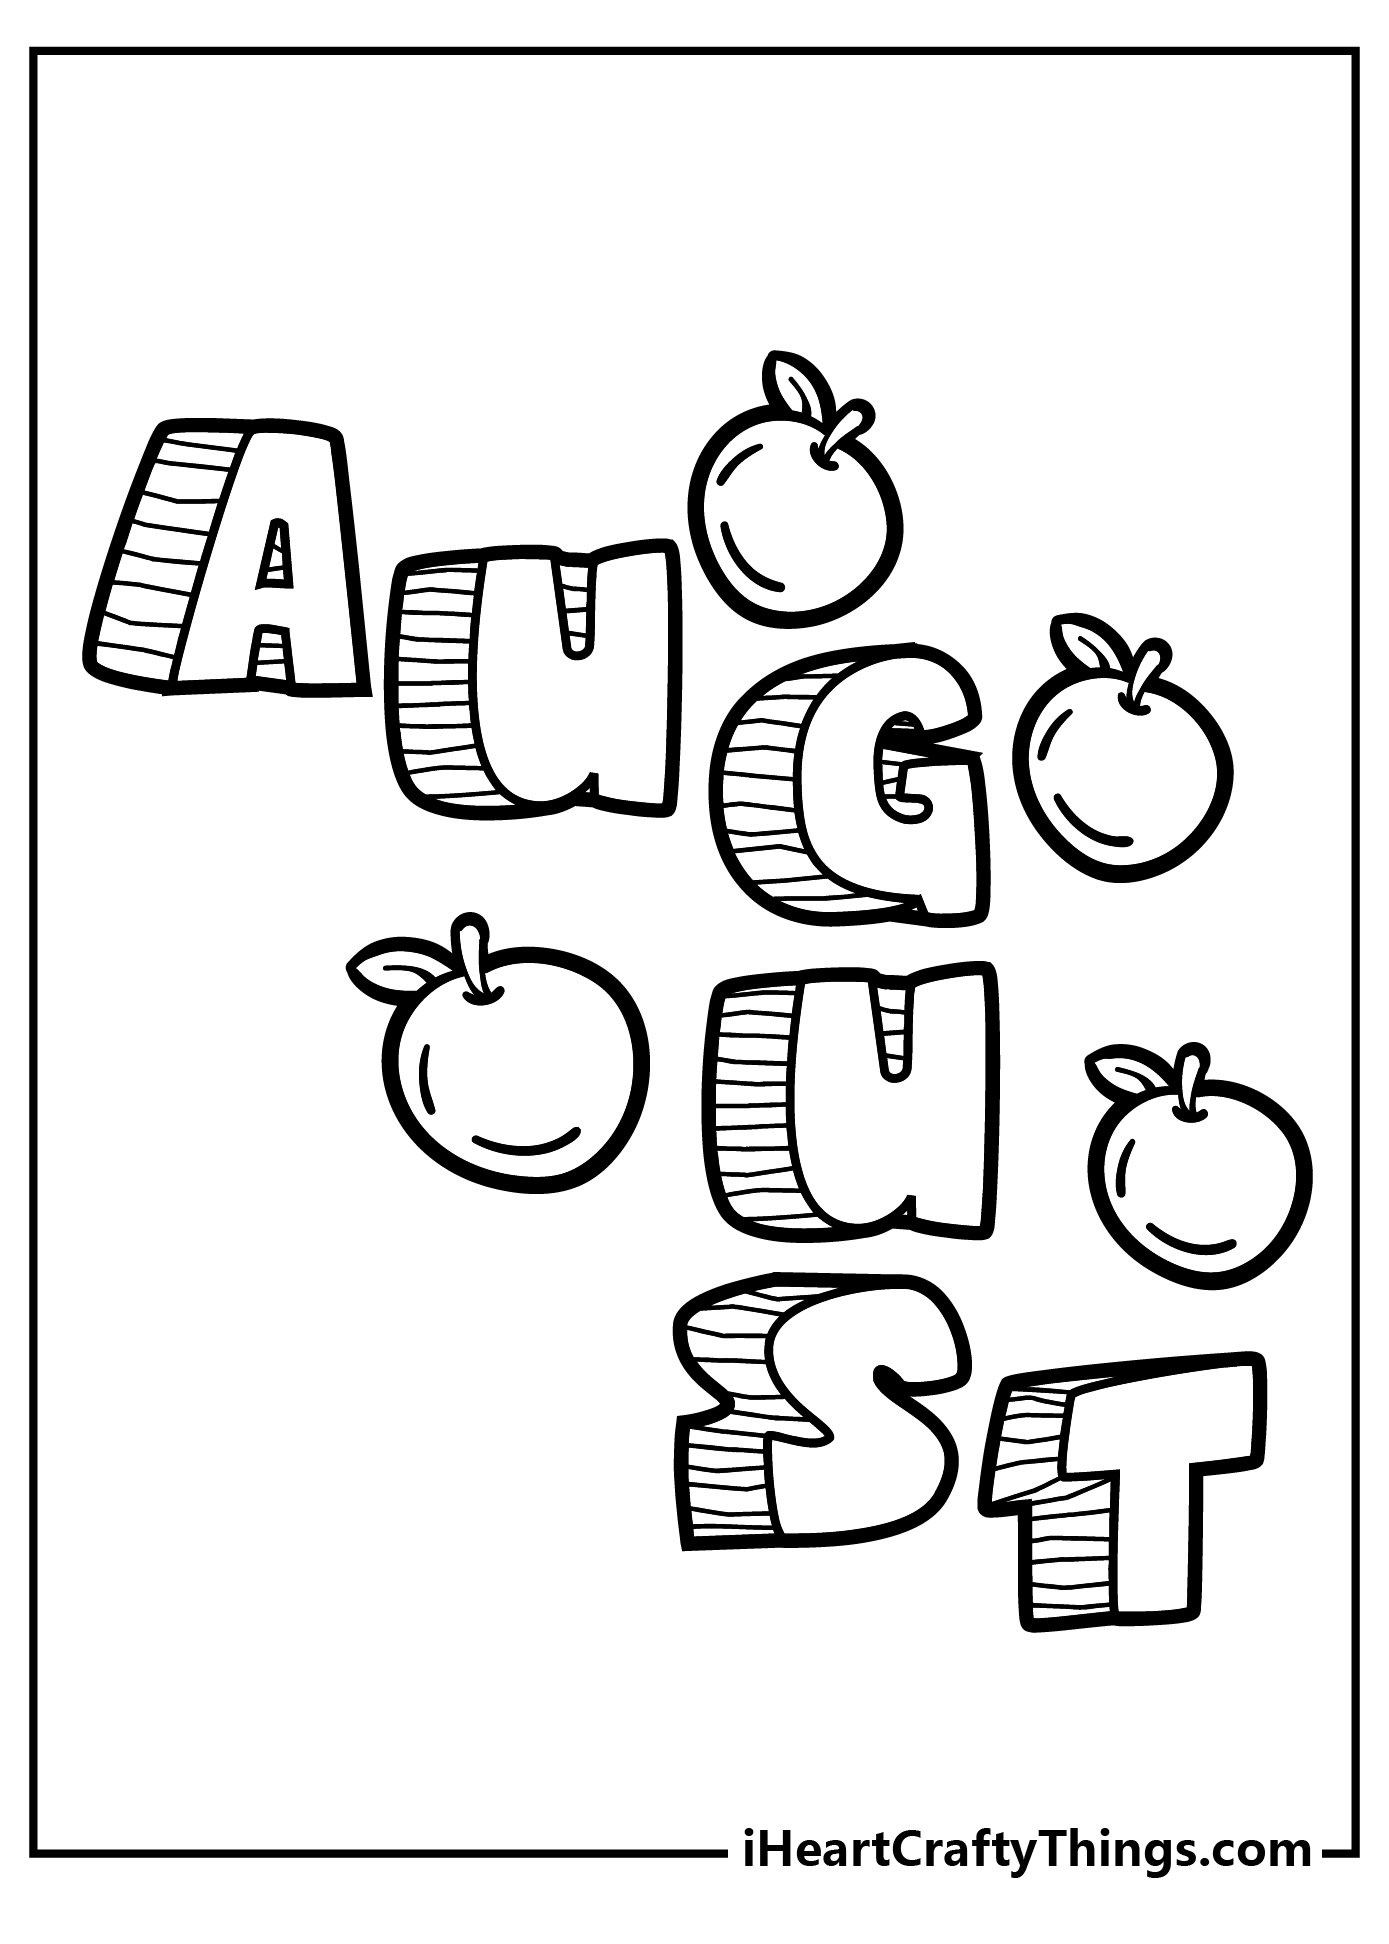 August coloring Original Sheet for children free download